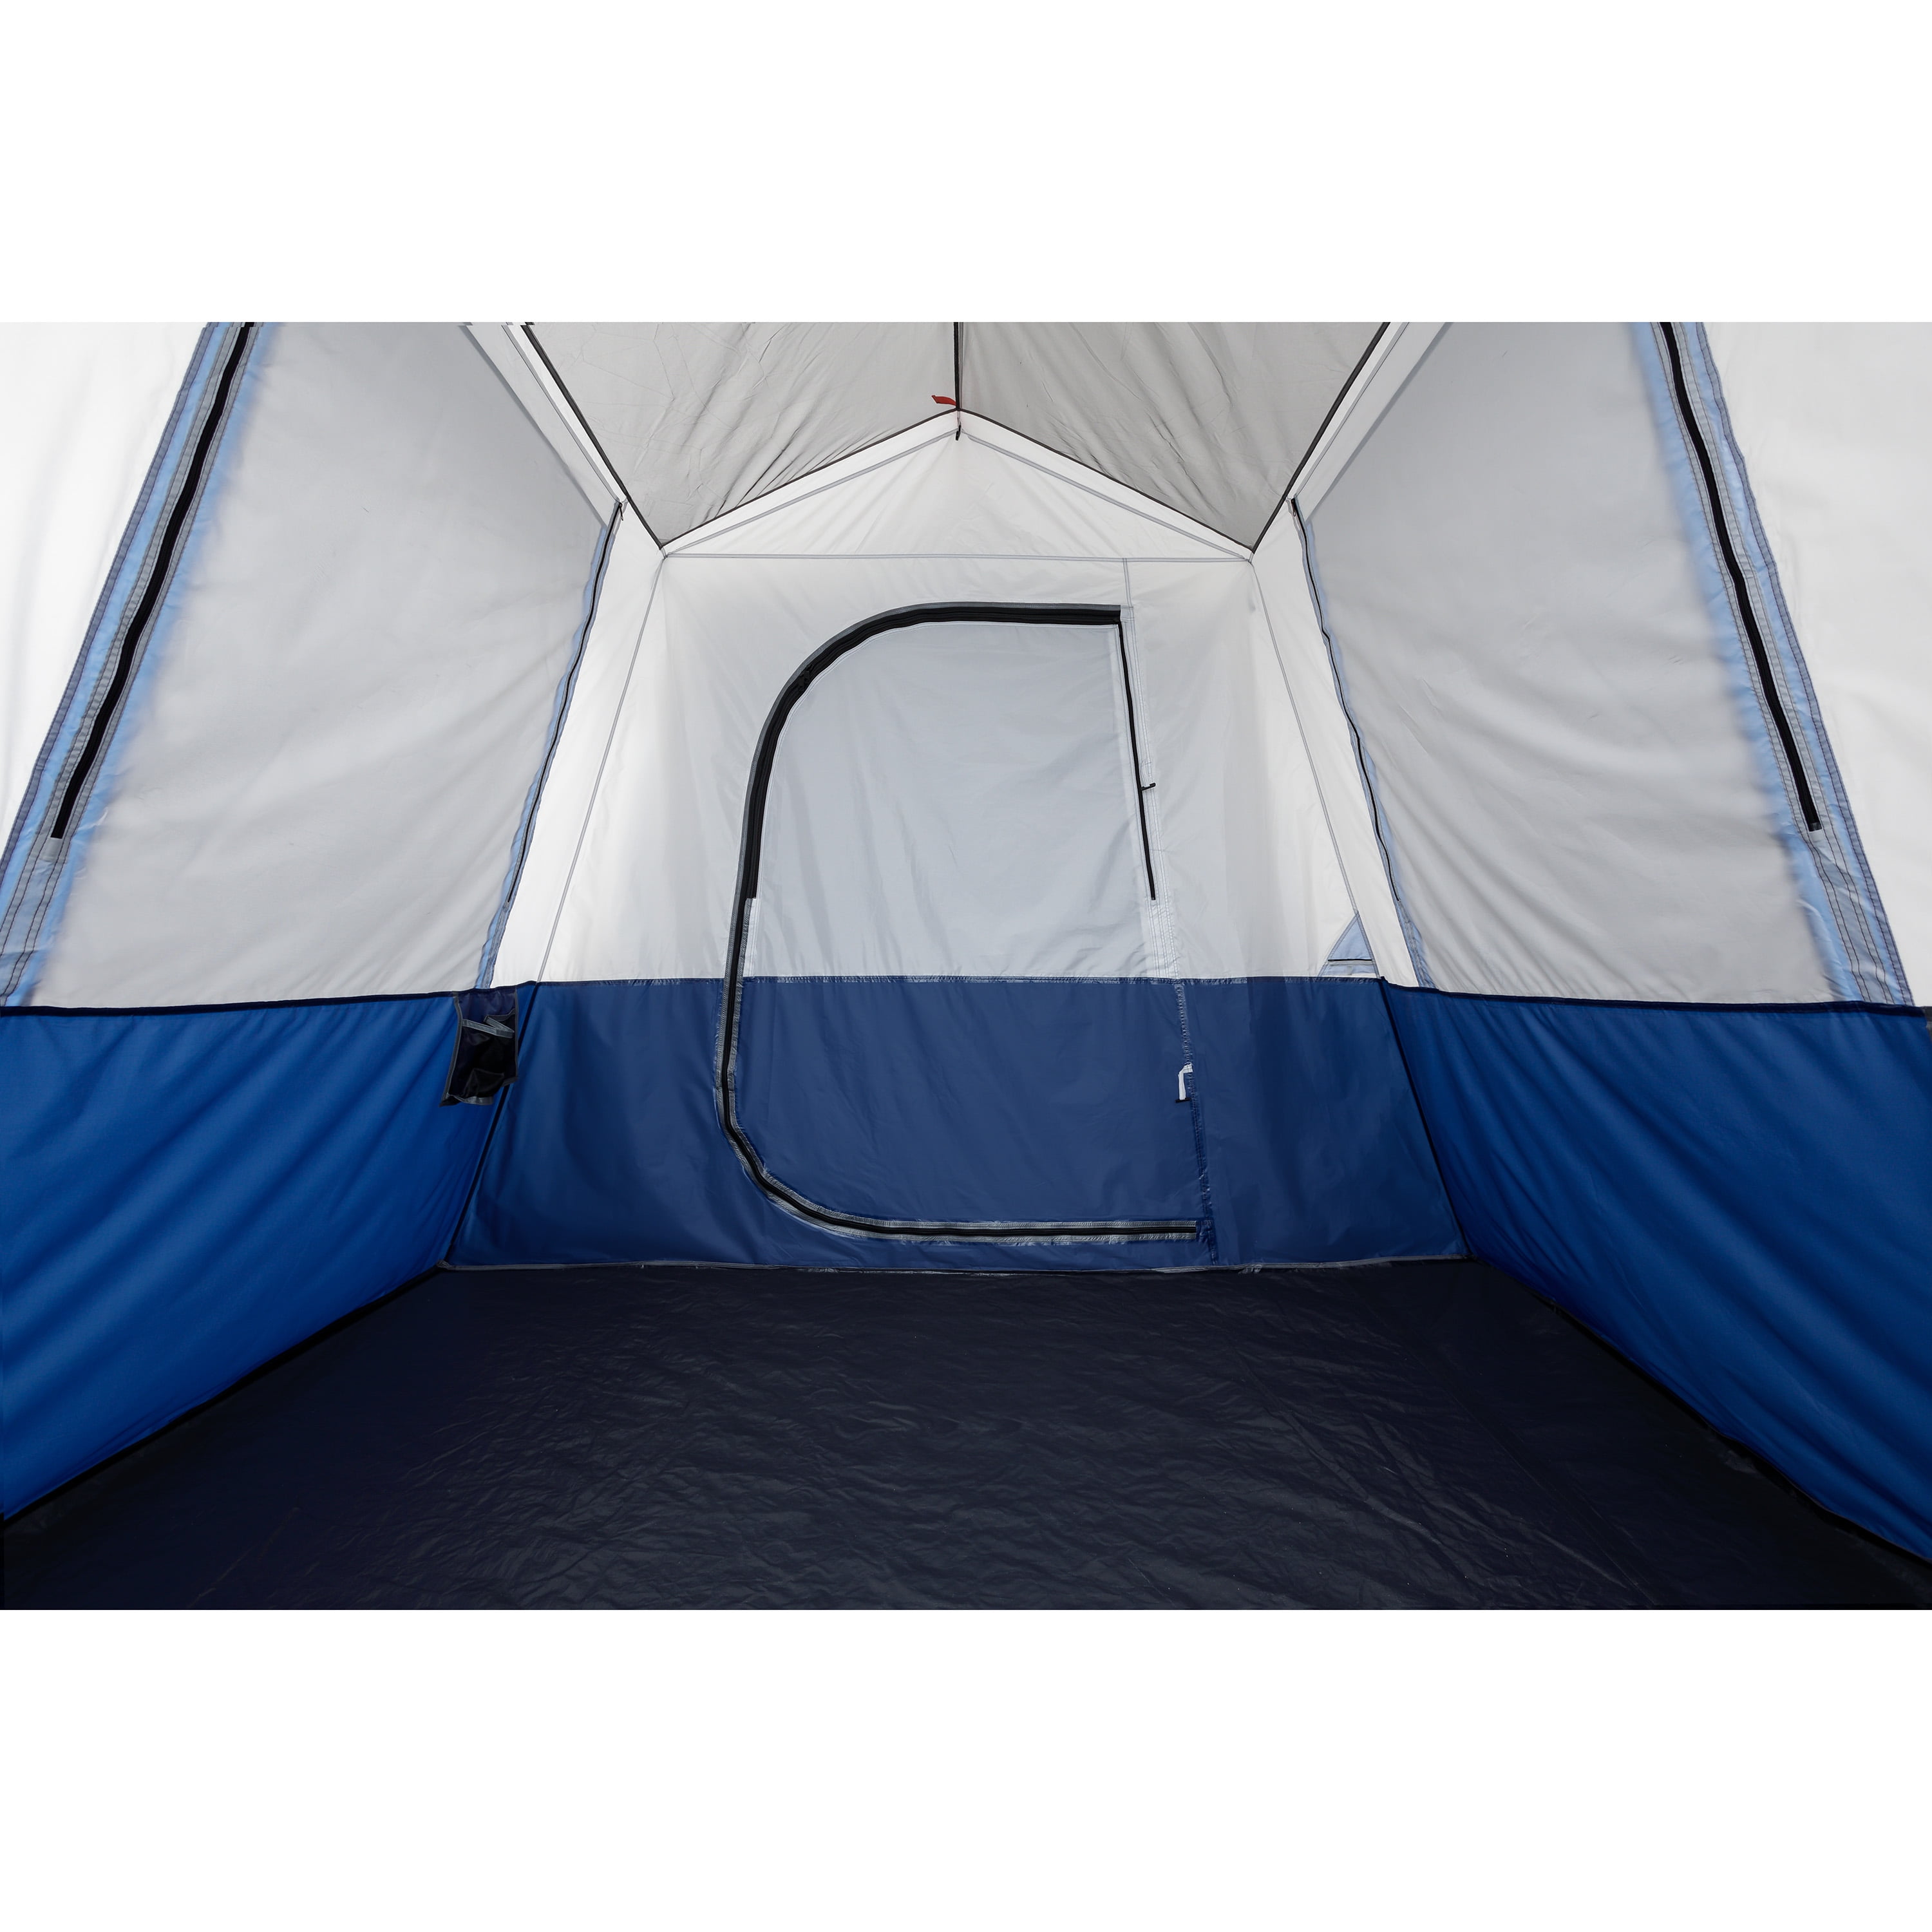 Ozark Trail Himont 1-Person Backpacking Tent with Full Fly